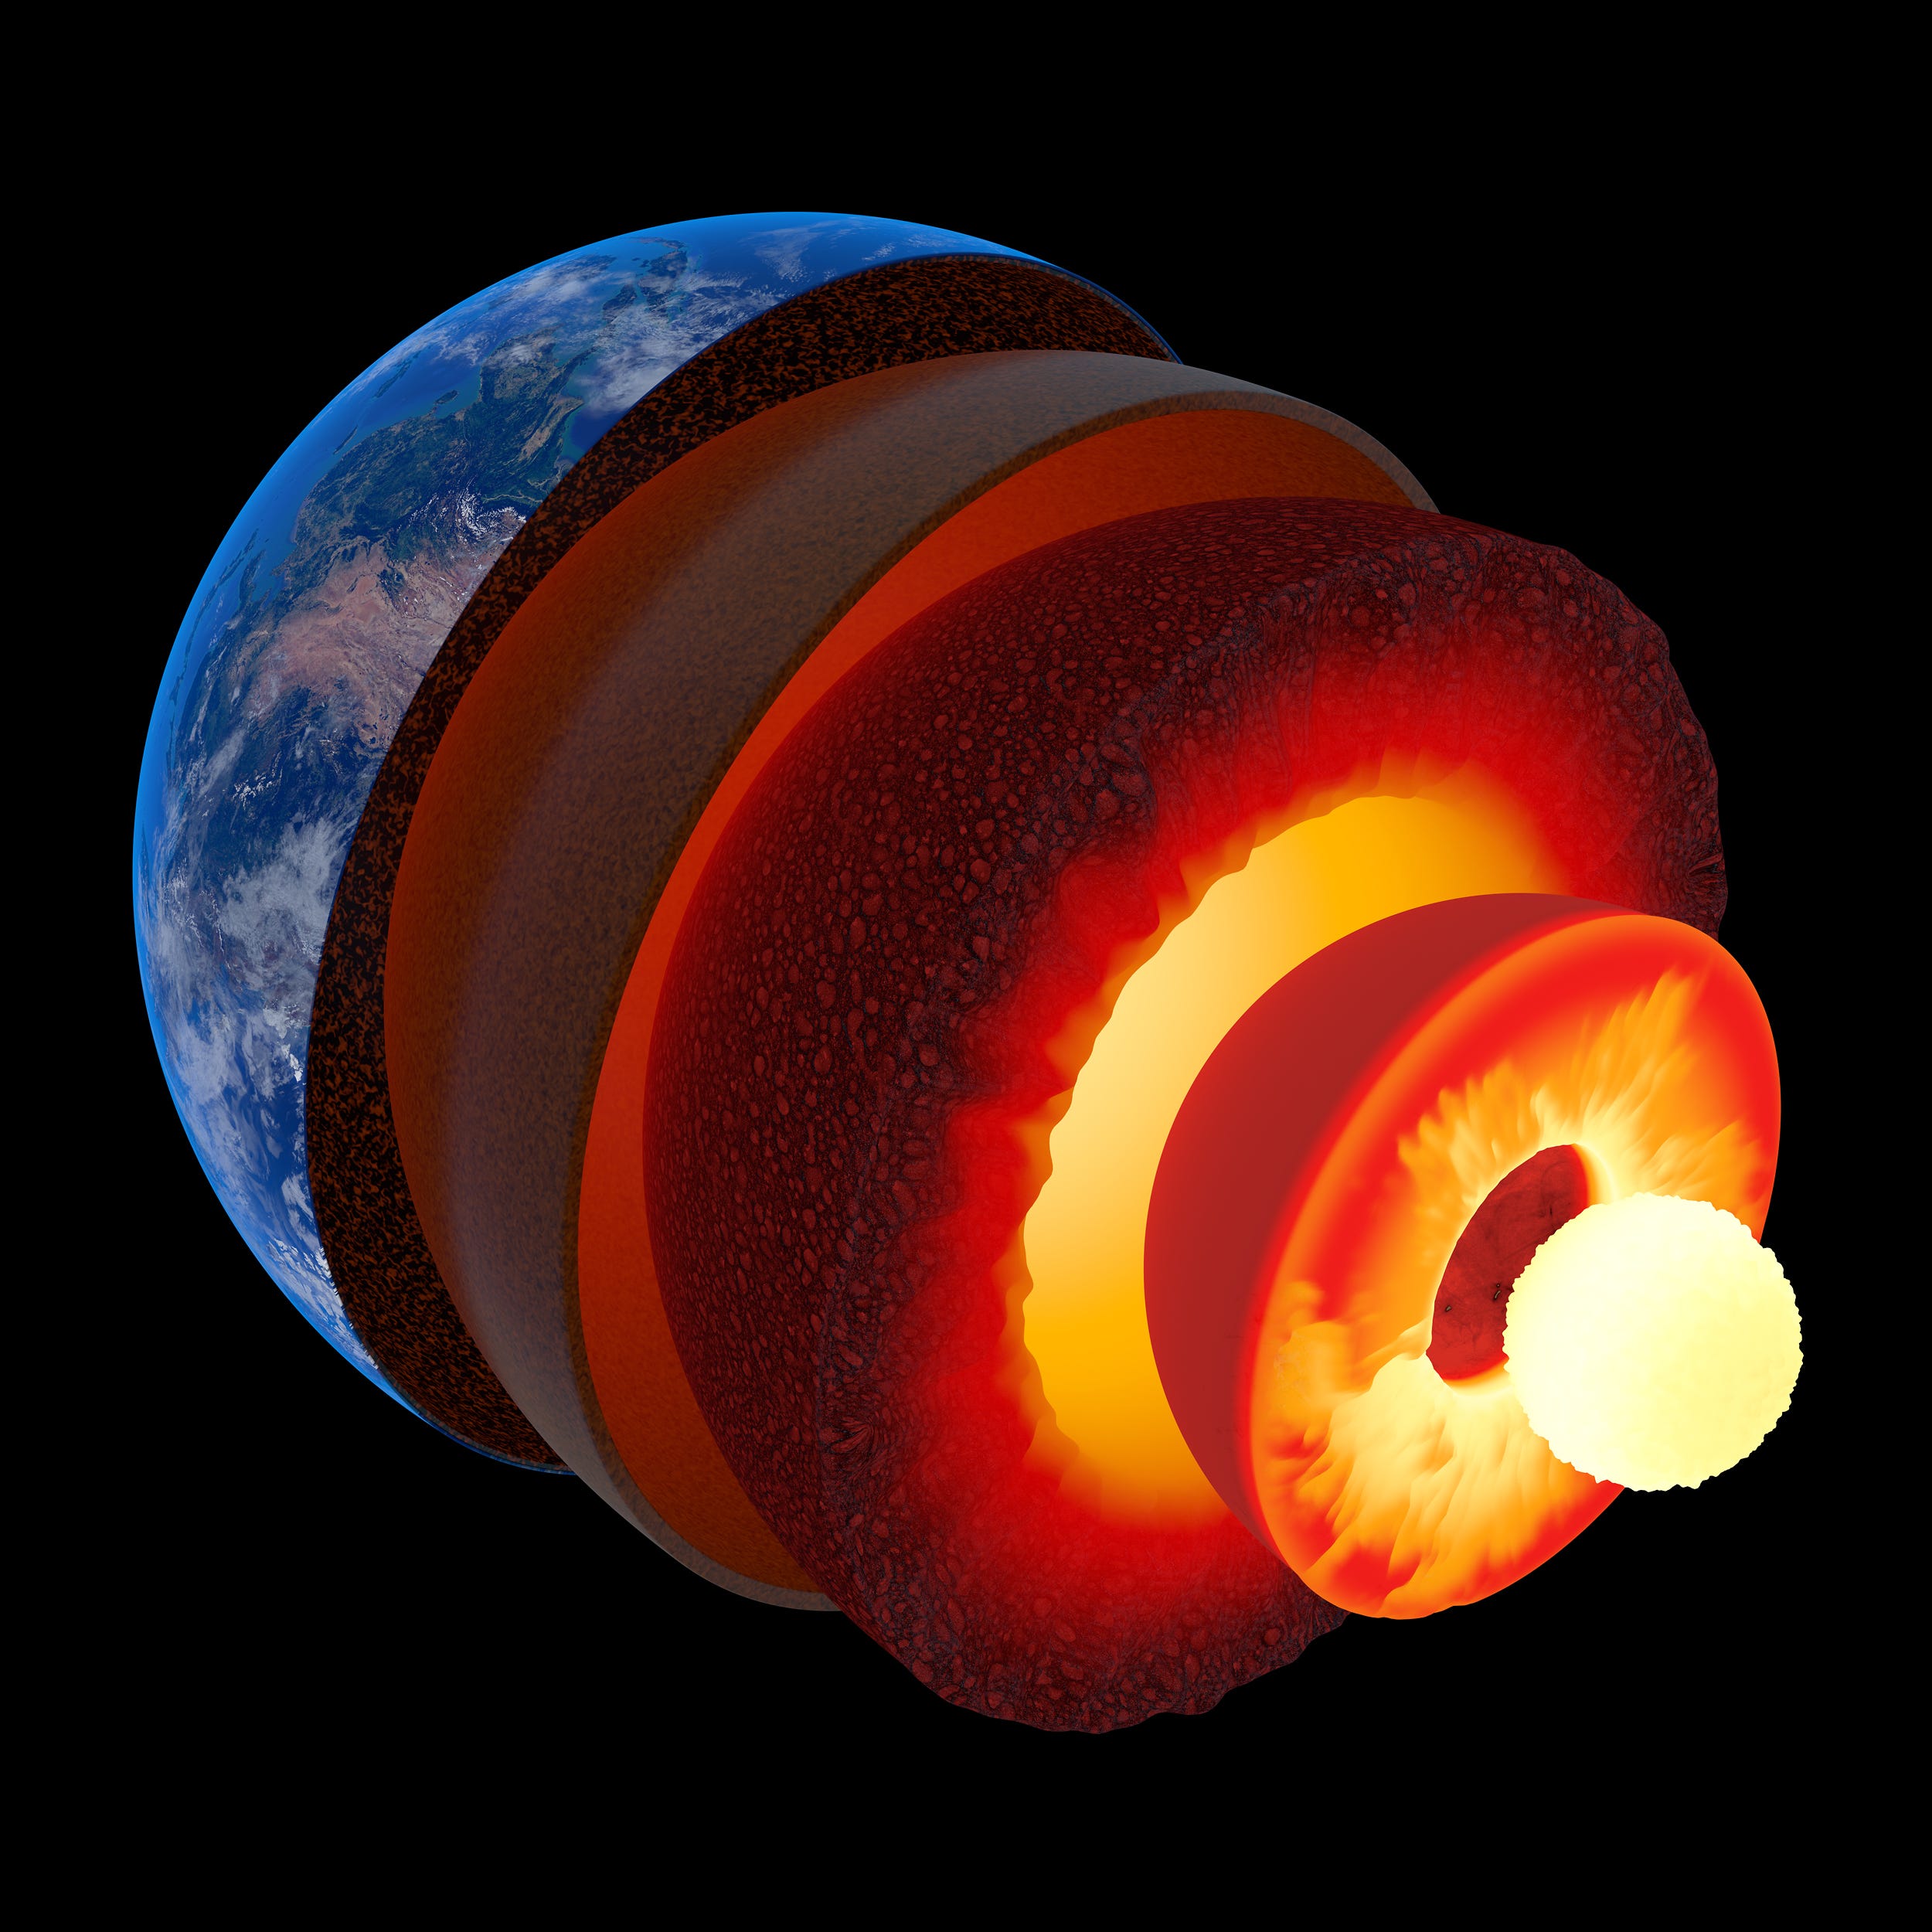 illustration of earth's core/mantle layers